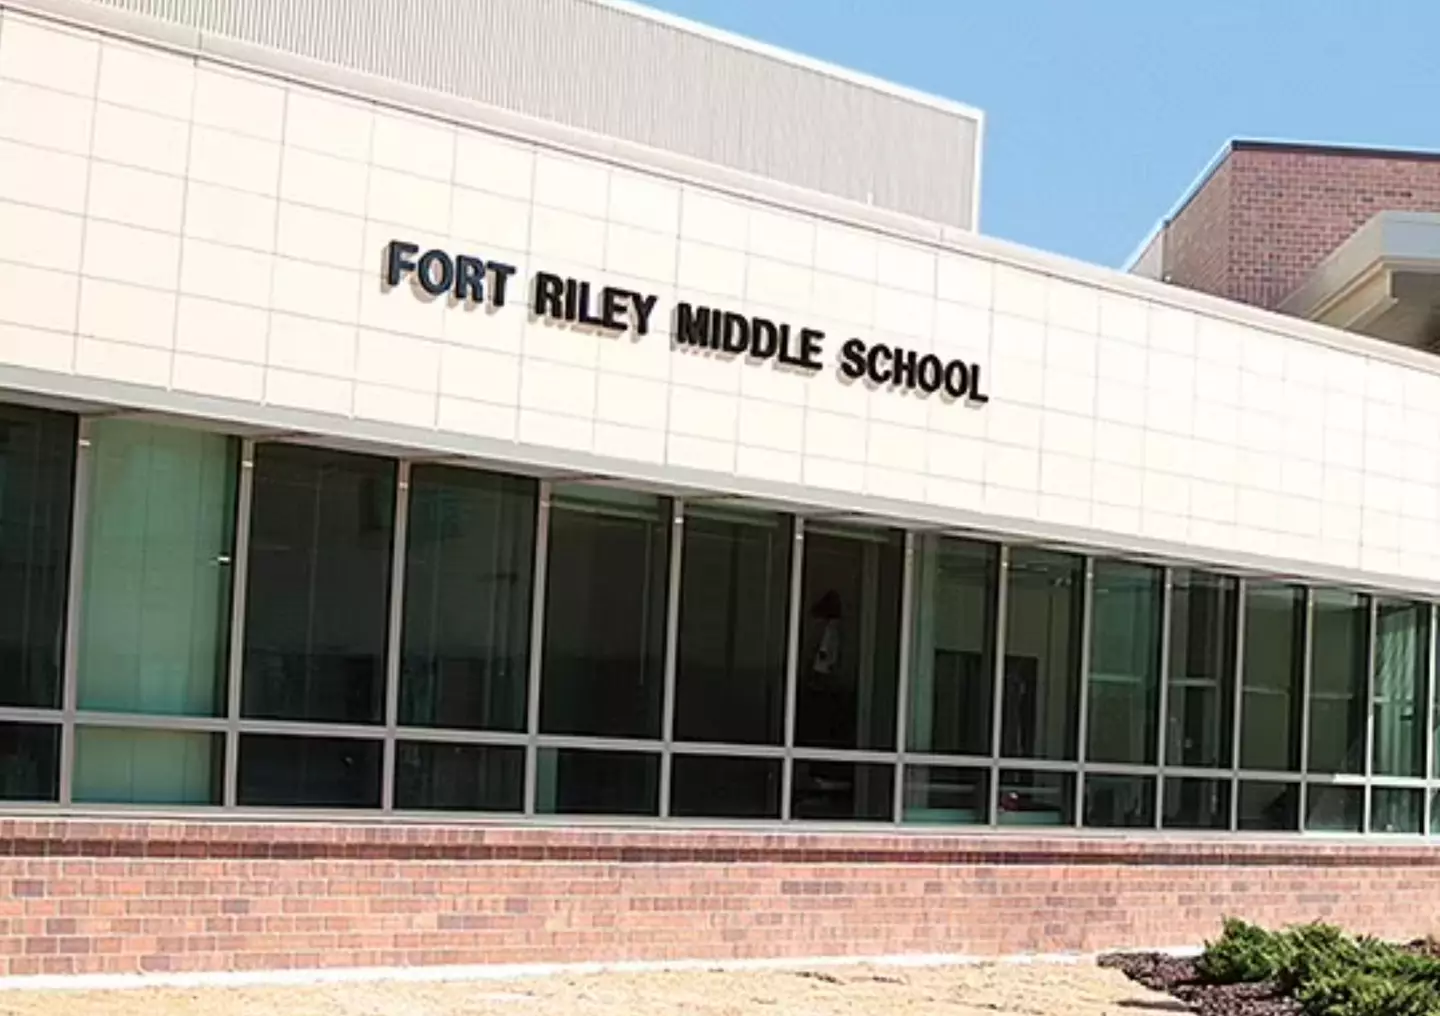 Fort Riley Middle School in Kansas.